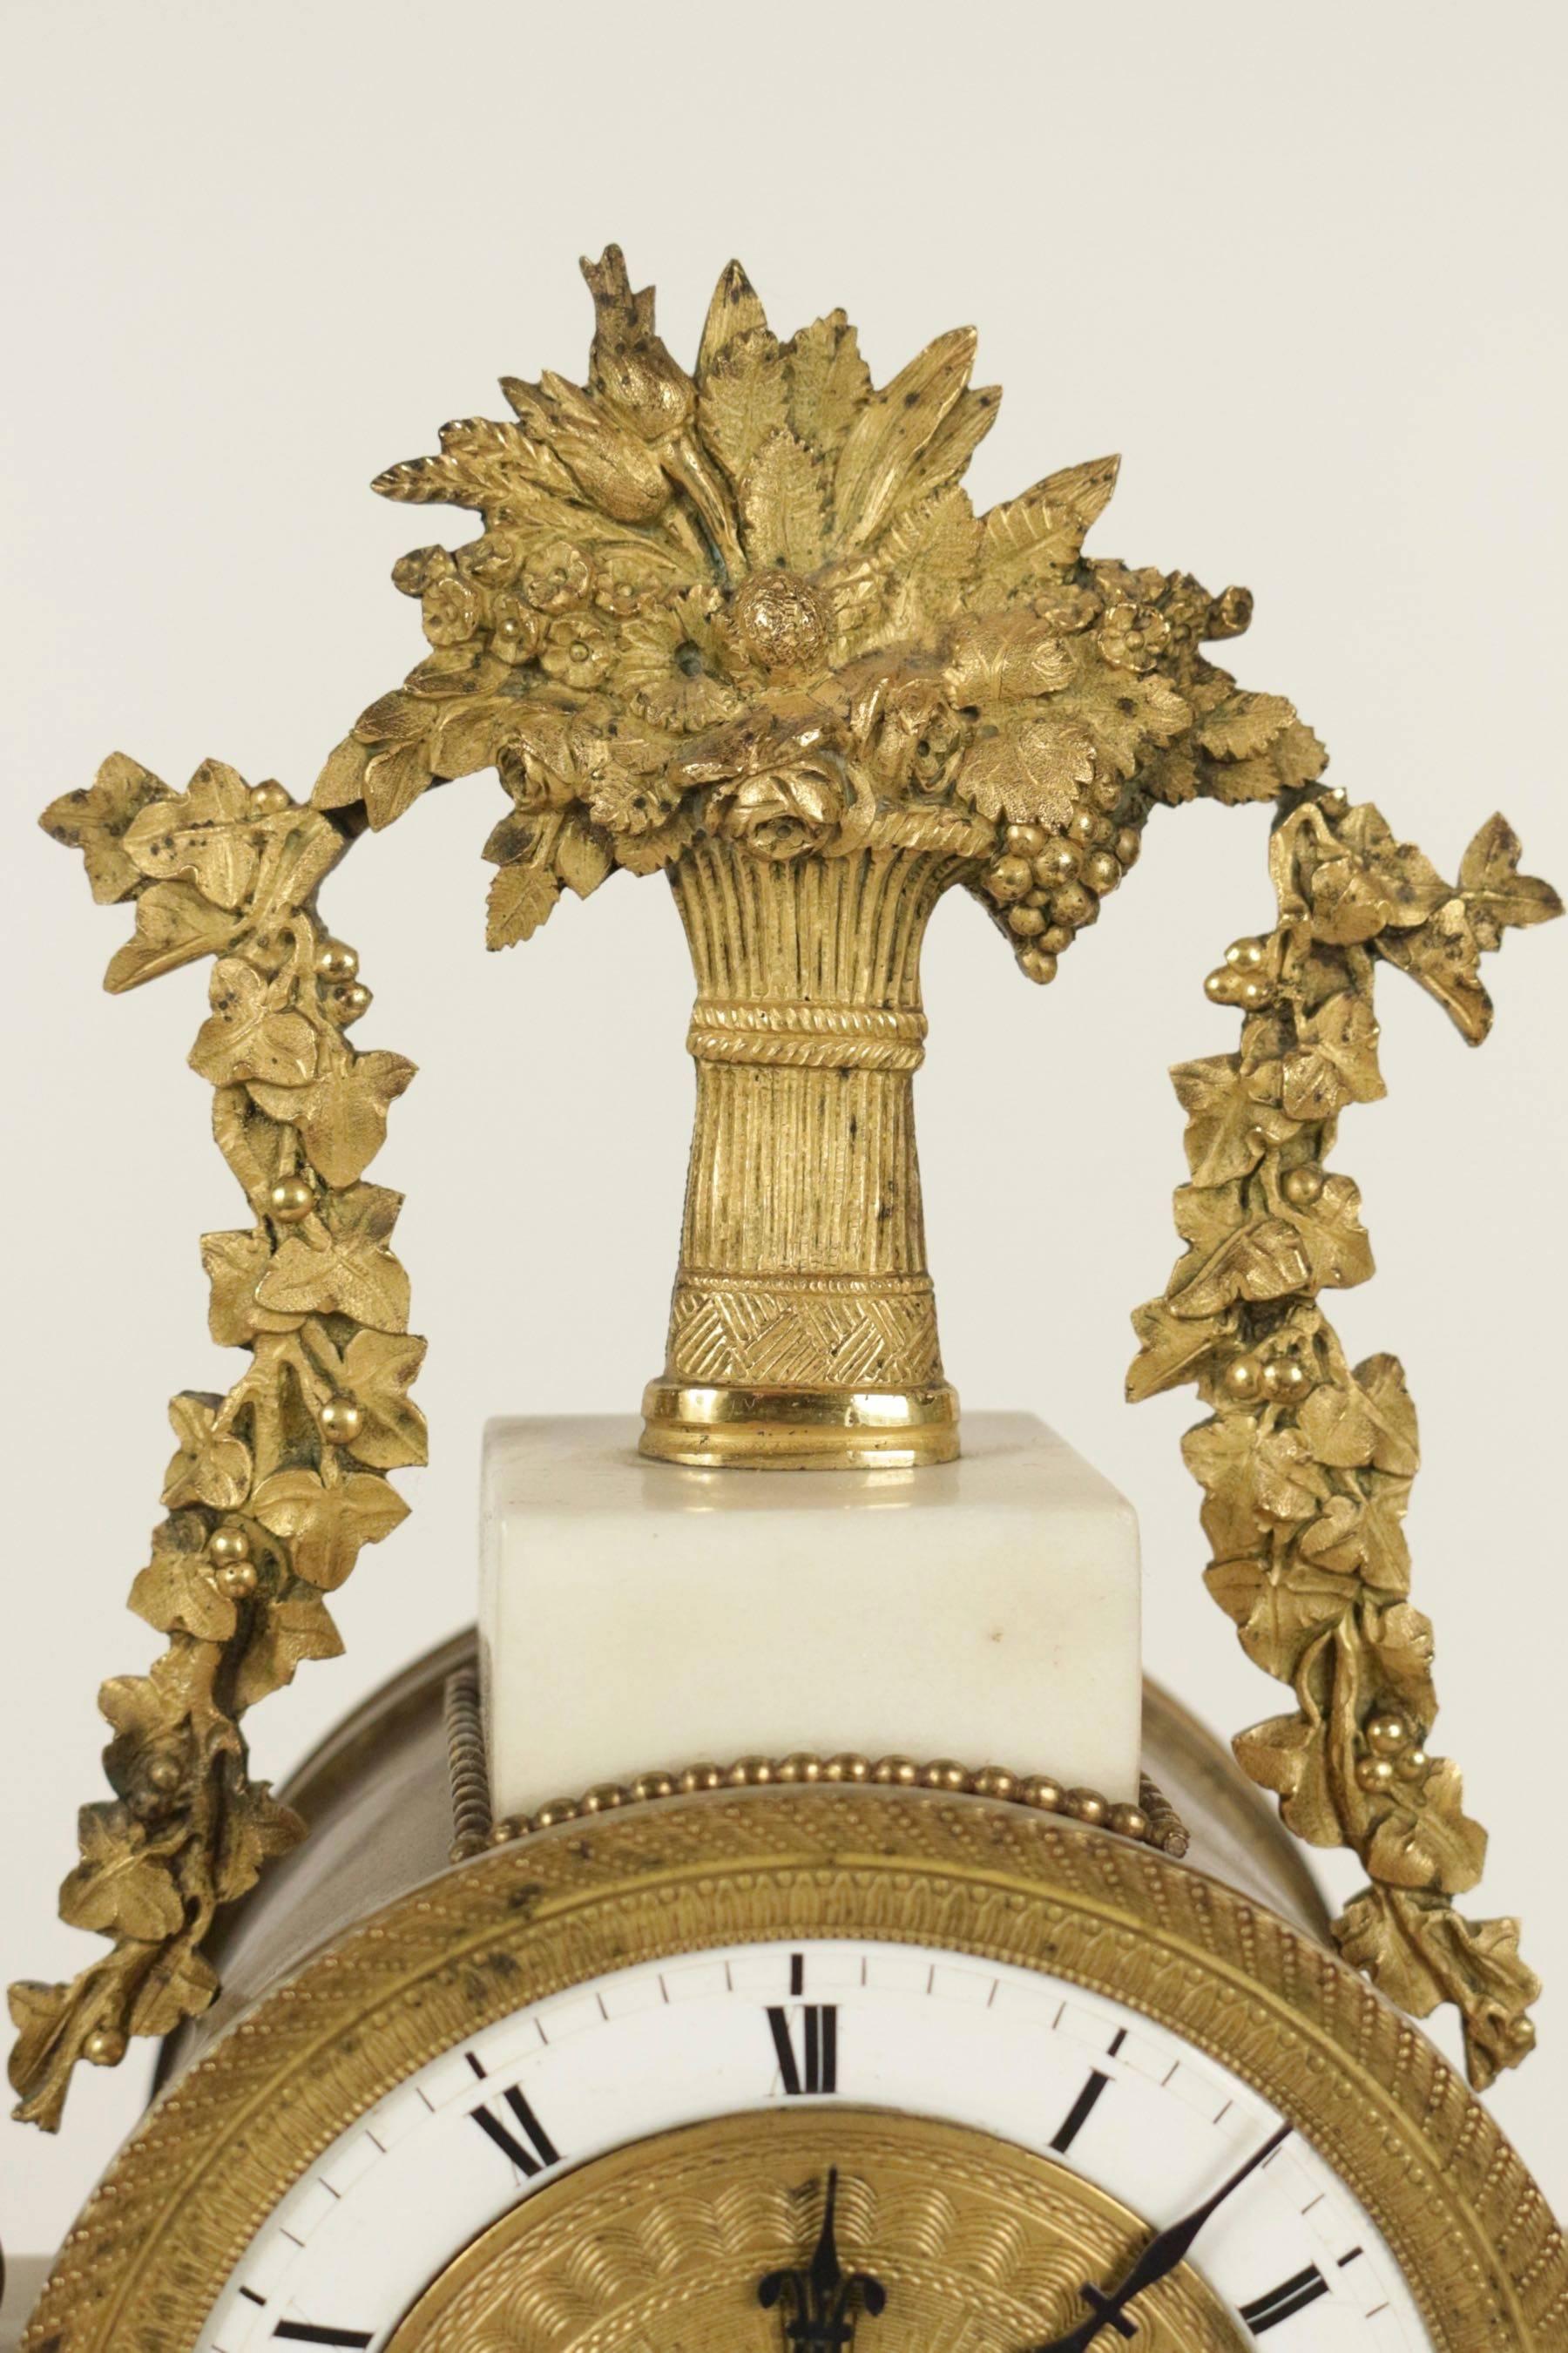 Awesome portico clock in white Carrara marble and fine original ormolu decorations, Return from Egypt.
The gilded bronze depicts dolphins, flowery vases, seated griffons, draperies, pendulum to the Sun King.
French Empire period work signed by